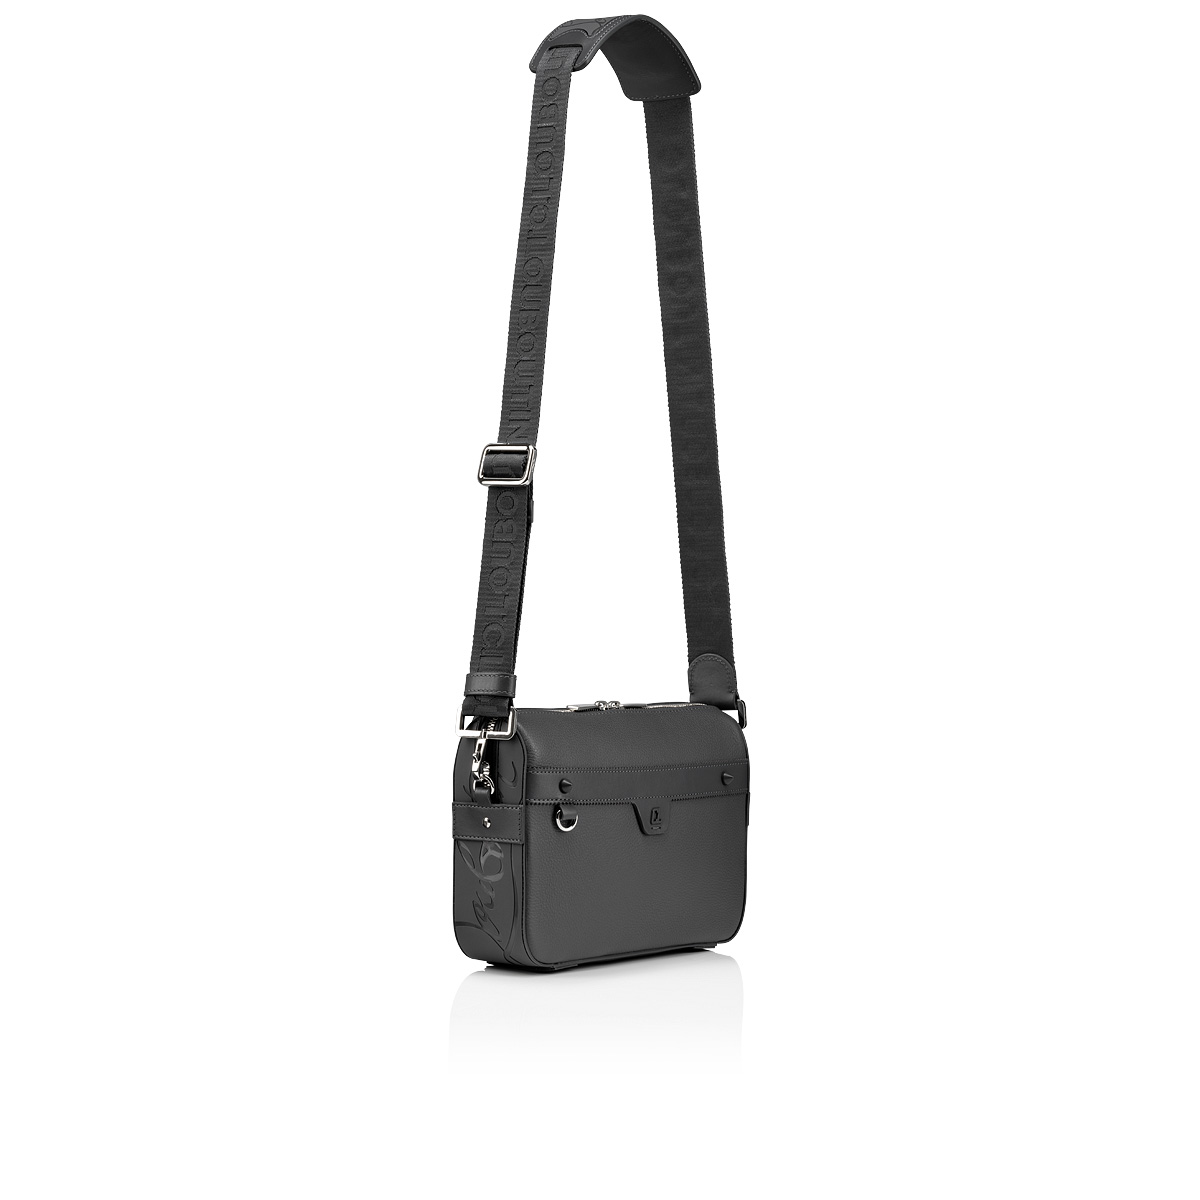 Ruisbuddy - Messenger bag - Grained calf leather and rubber 